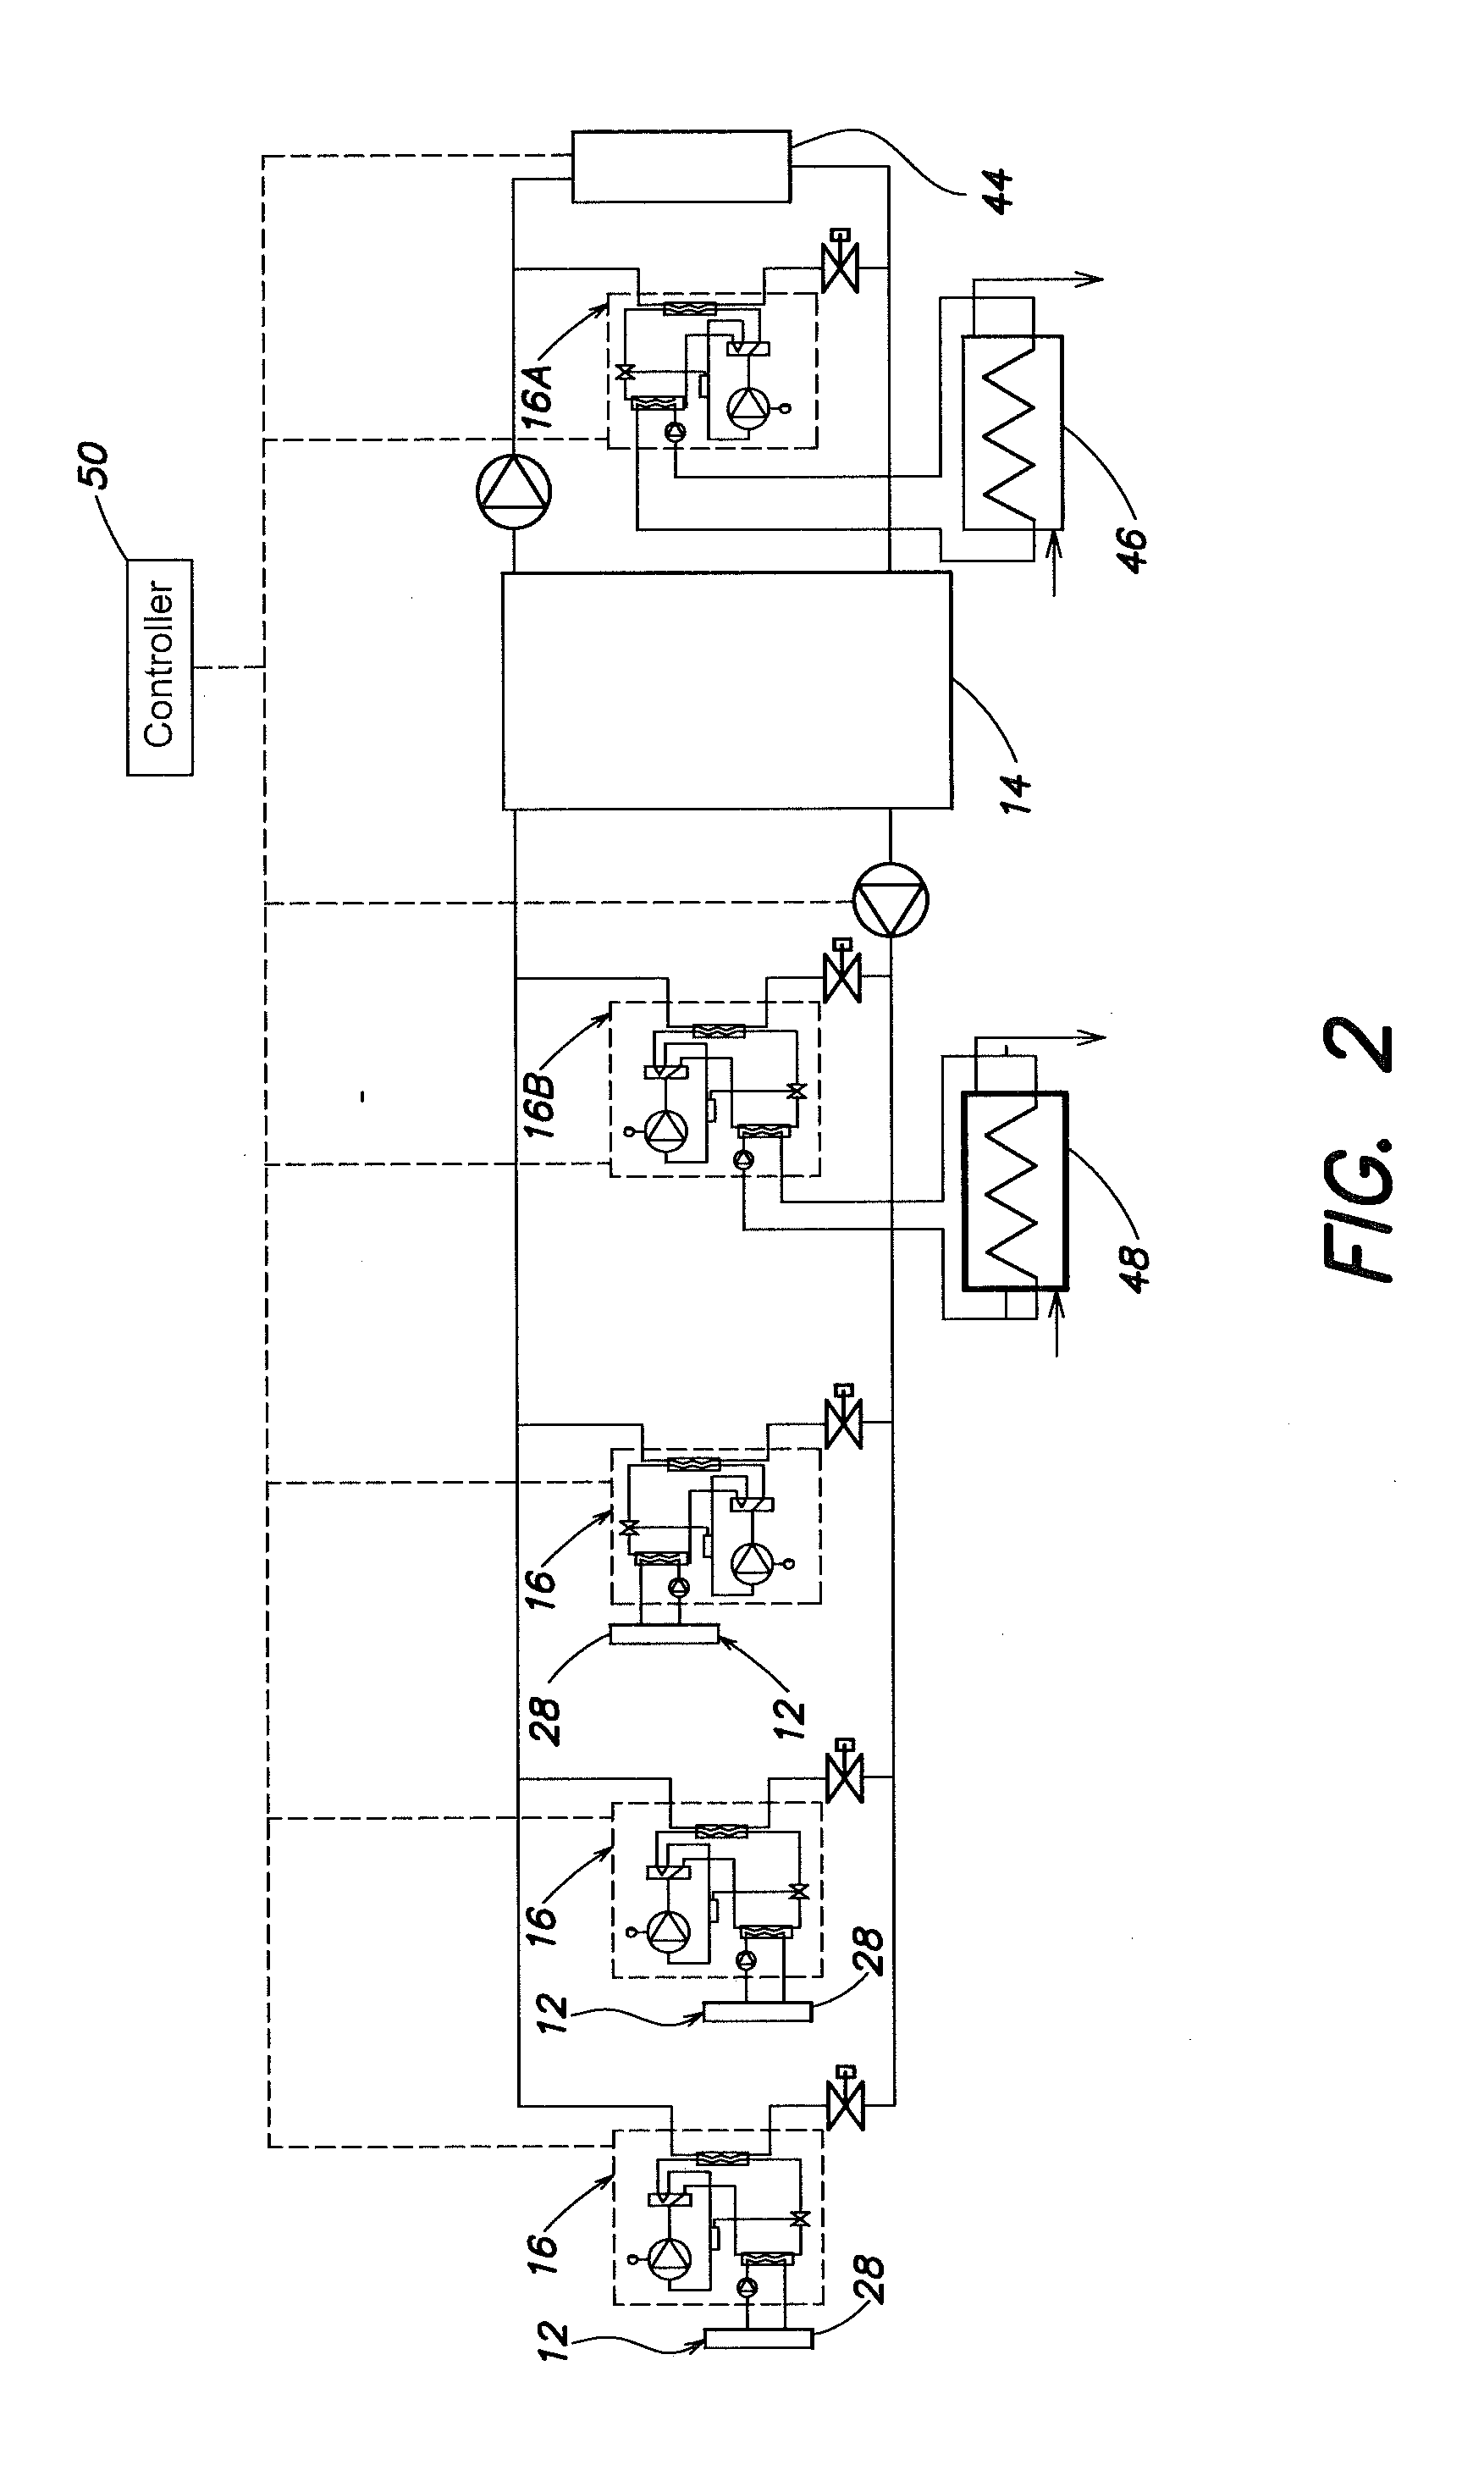 System and method for maintaining air temperature within a building HVAC system